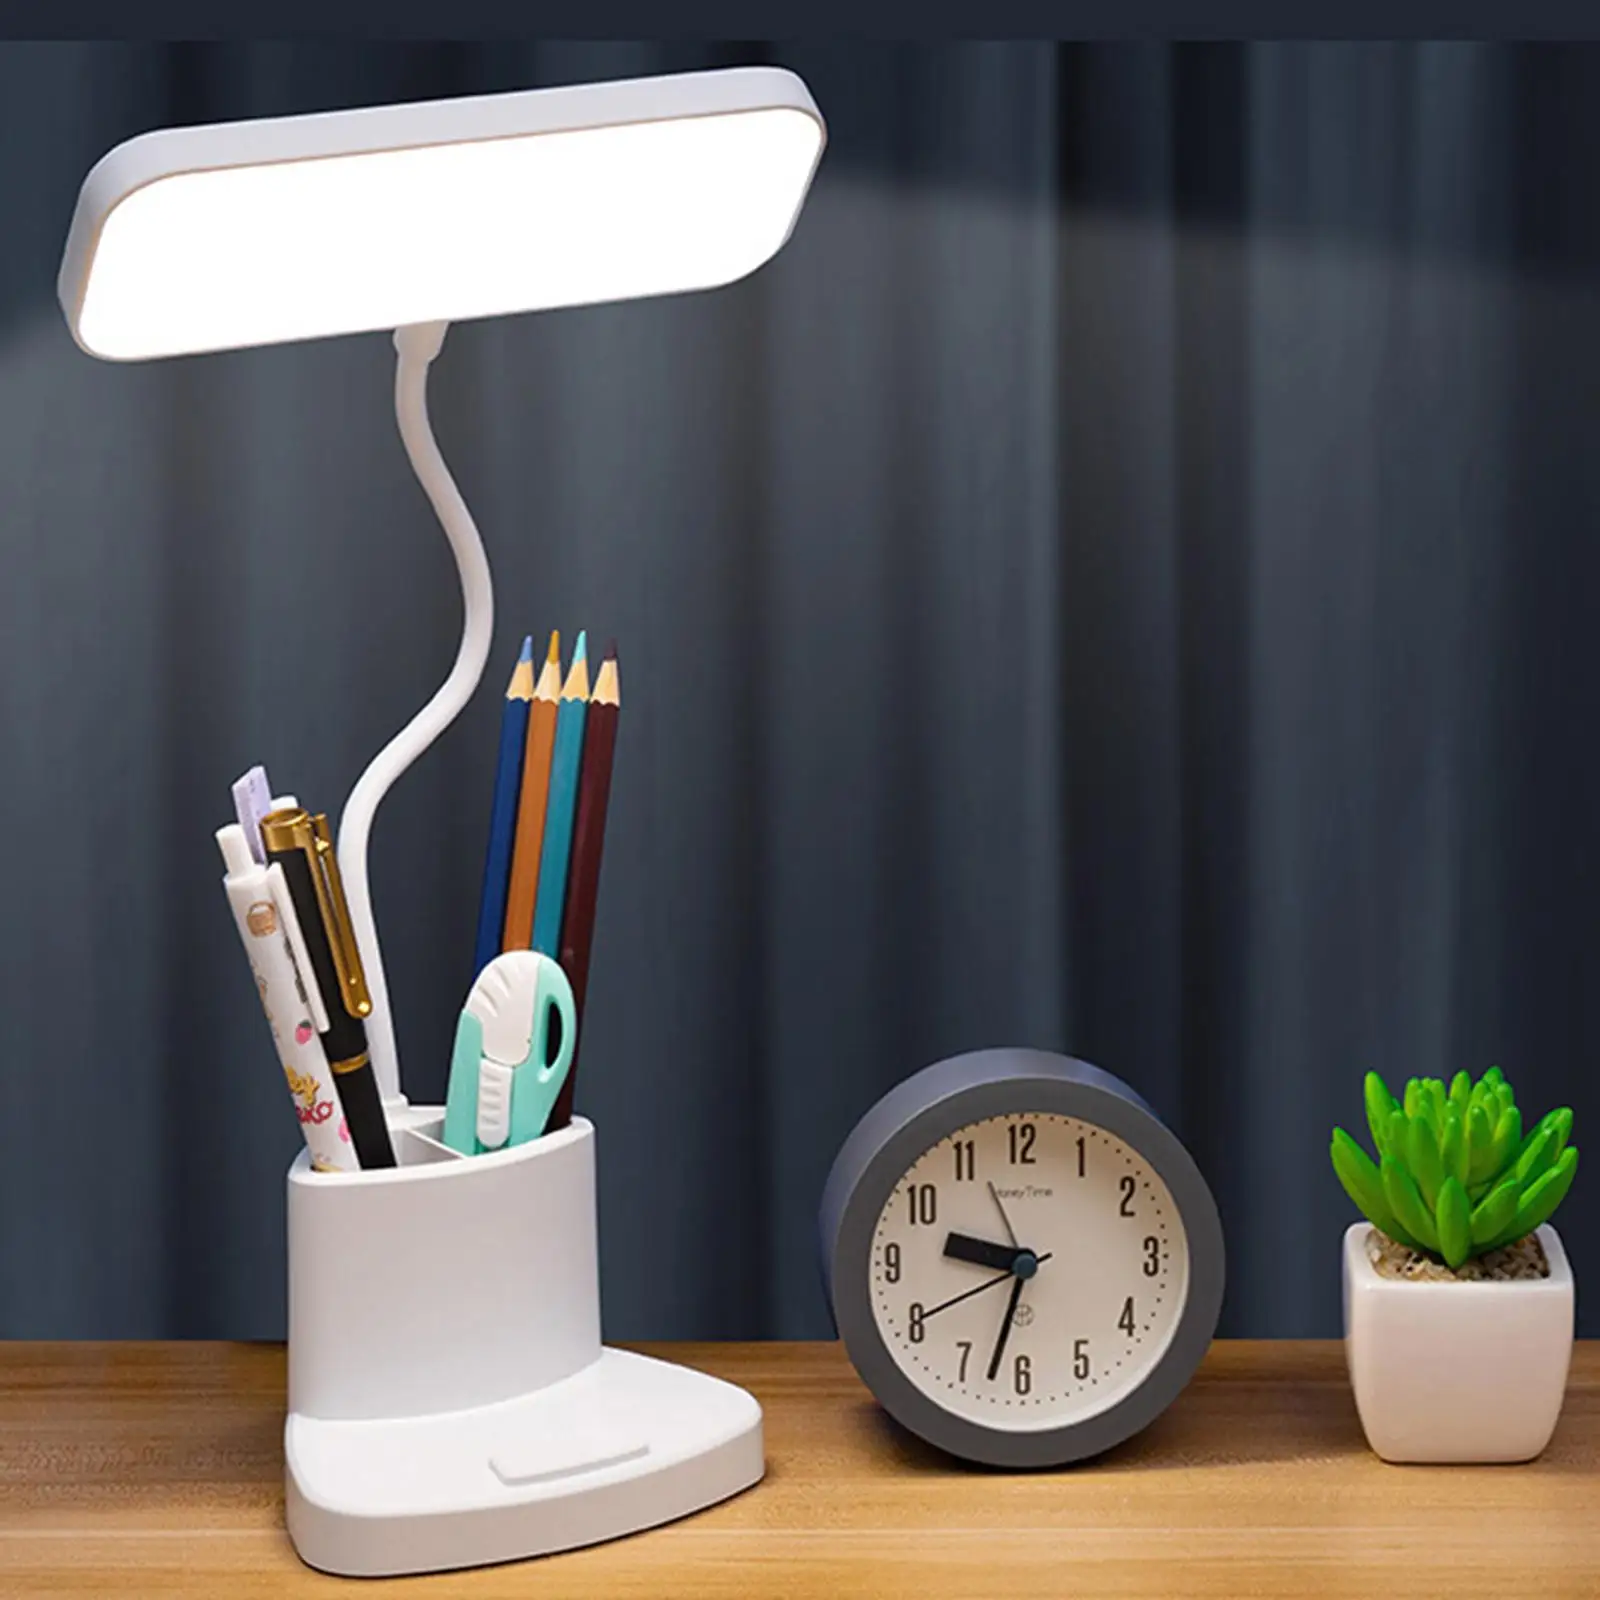 Adjustable LED Desk Light USB Phone Stand Dimmable W/ Pen Holder Storage Flexible Reading Lamp Eye Protection for Bedside Table